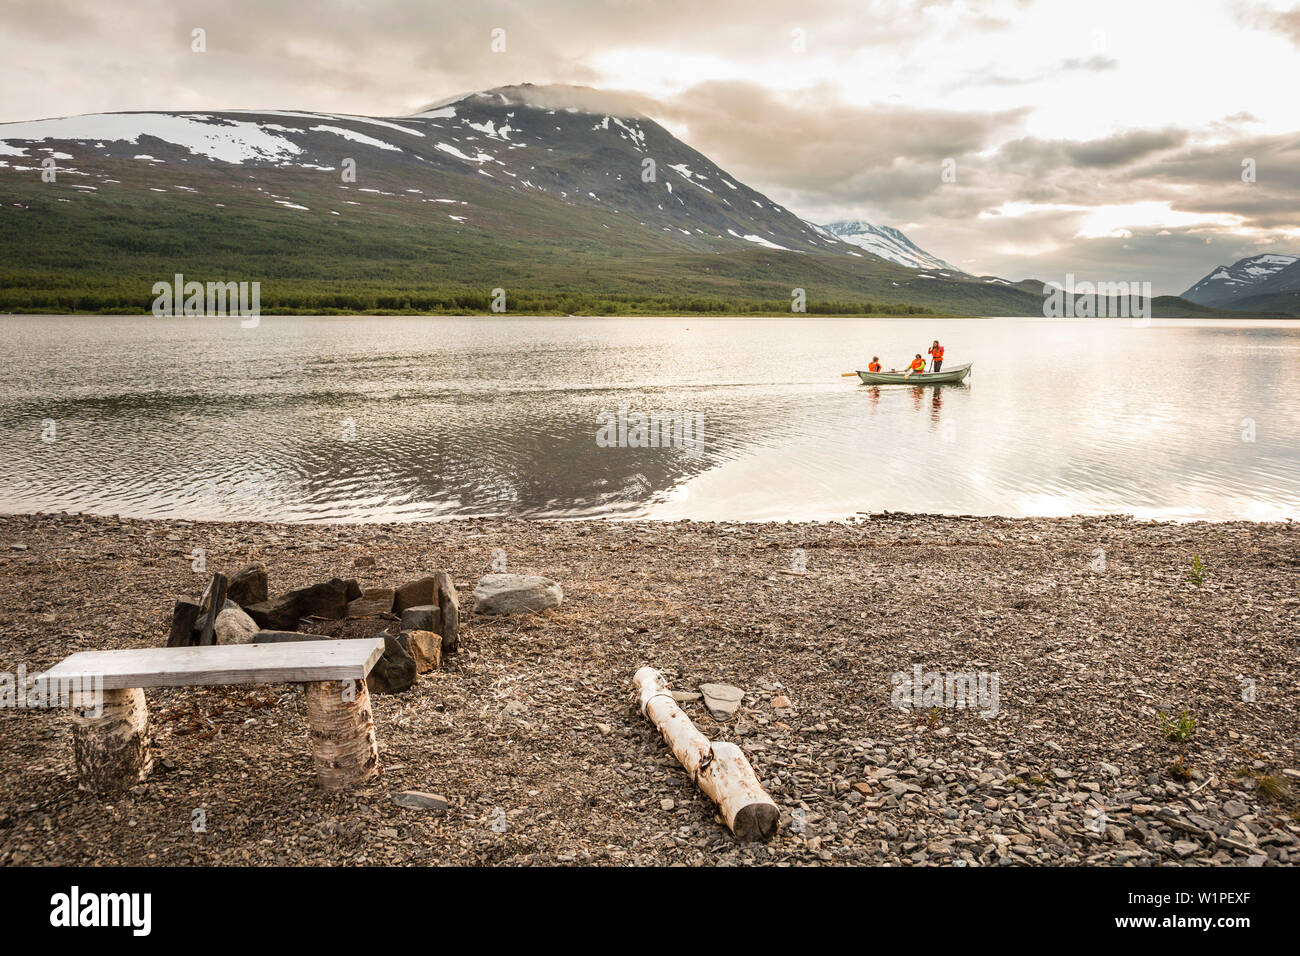 Two girls and a woman rowing a boat on Teusajaure. Kungsleden trekking. Laponia, Lapland, Sweden. Stock Photo